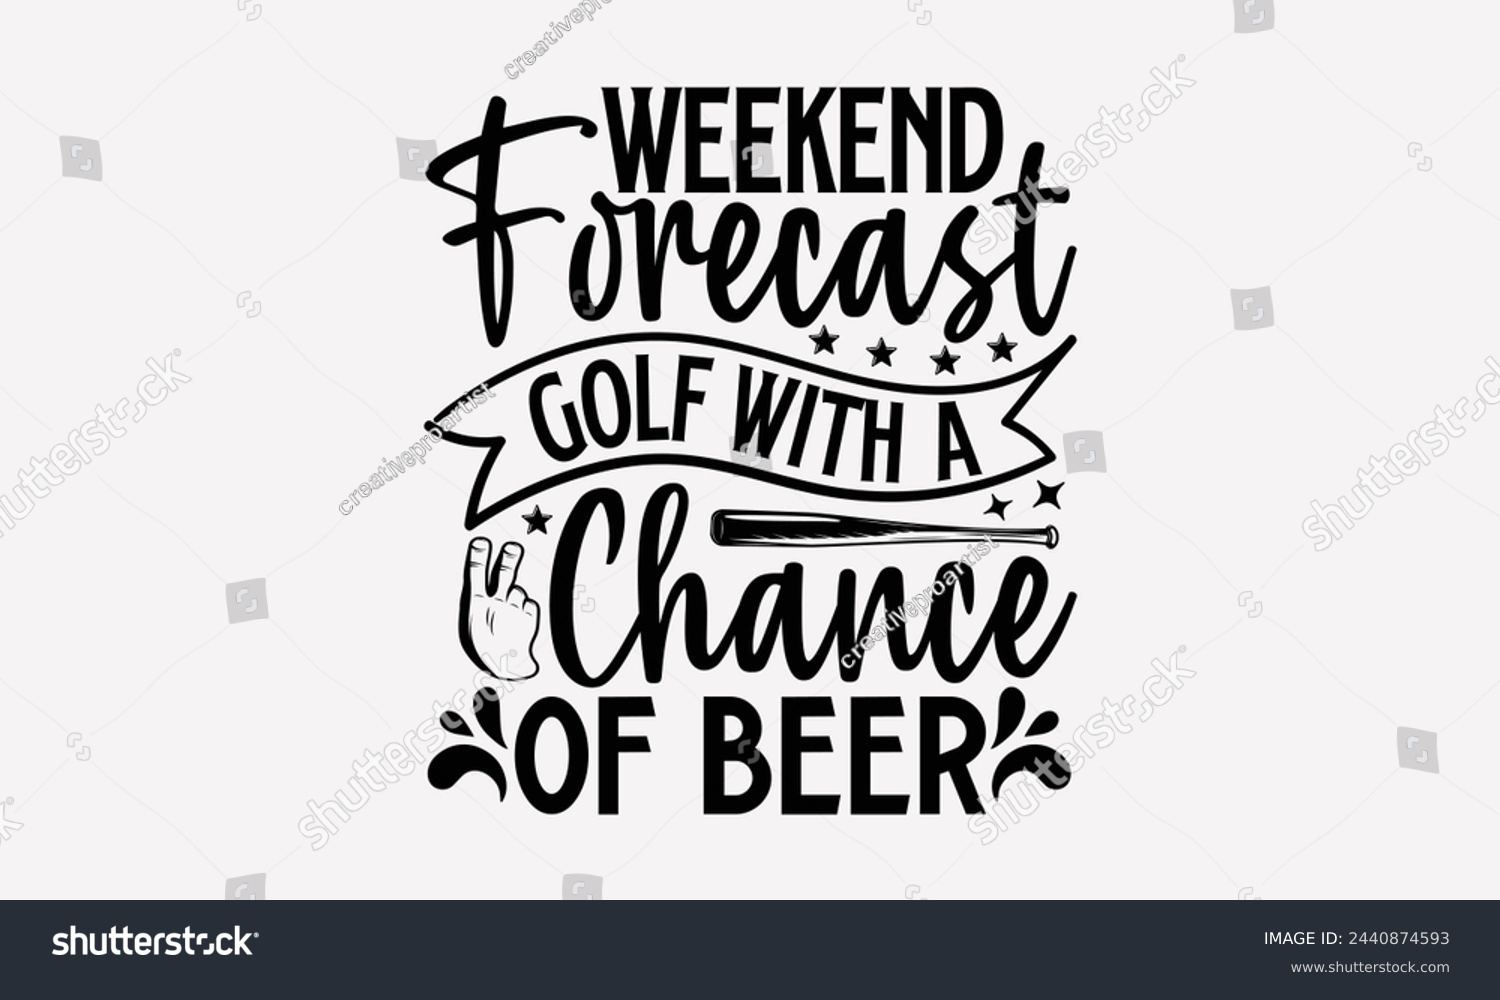 SVG of Weekend Forecast Golf With A Chance Of Beer- Golf t- shirt design, Hand drawn lettering phrase isolated on white background, for Cutting Machine, Silhouette Cameo, Cricut, greeting card template with  svg